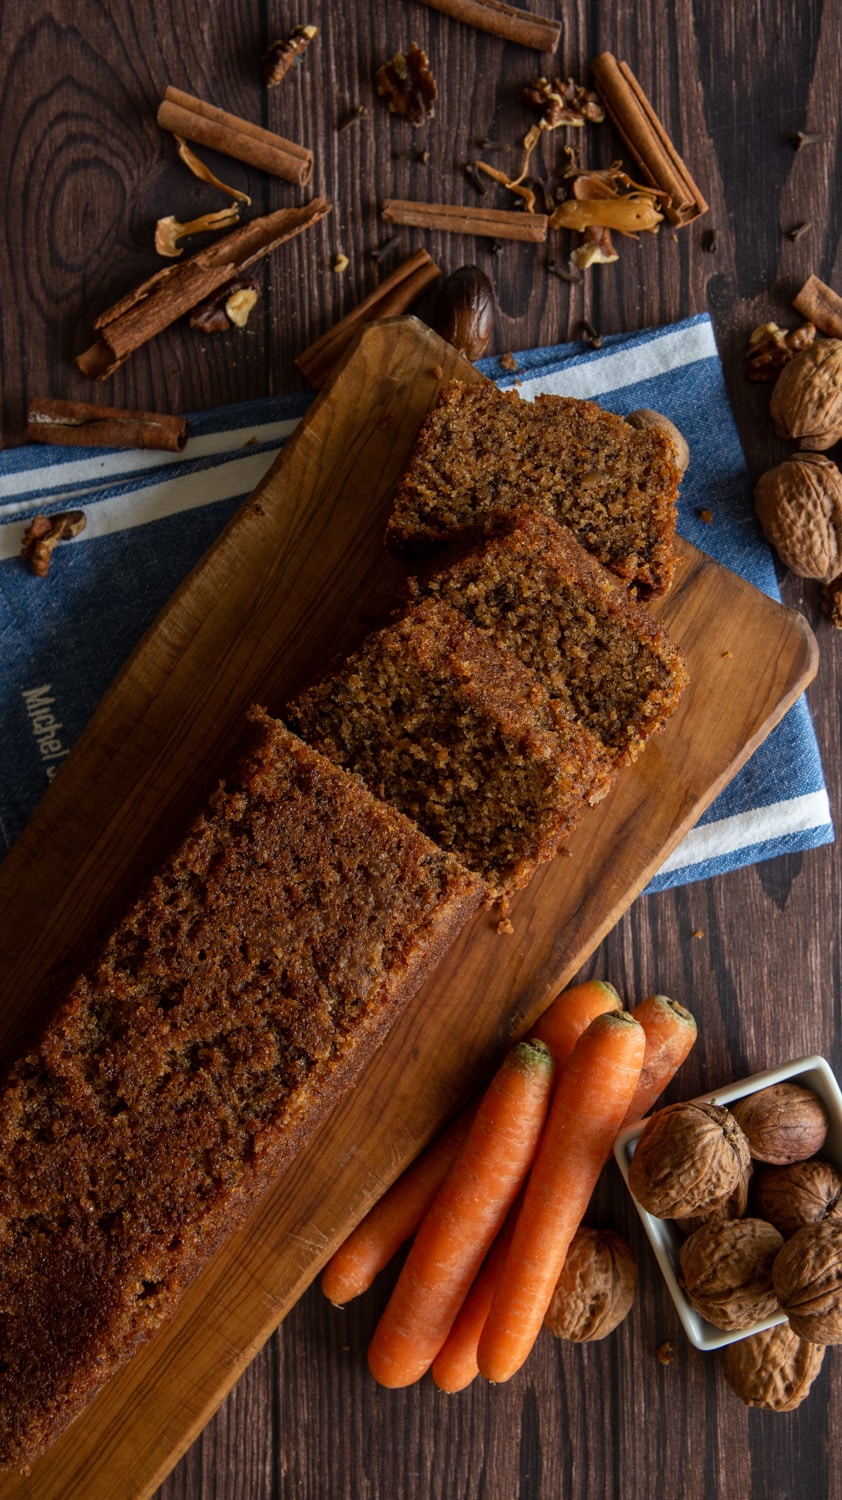 Carrot cake loaf on a cutting board cut into slices